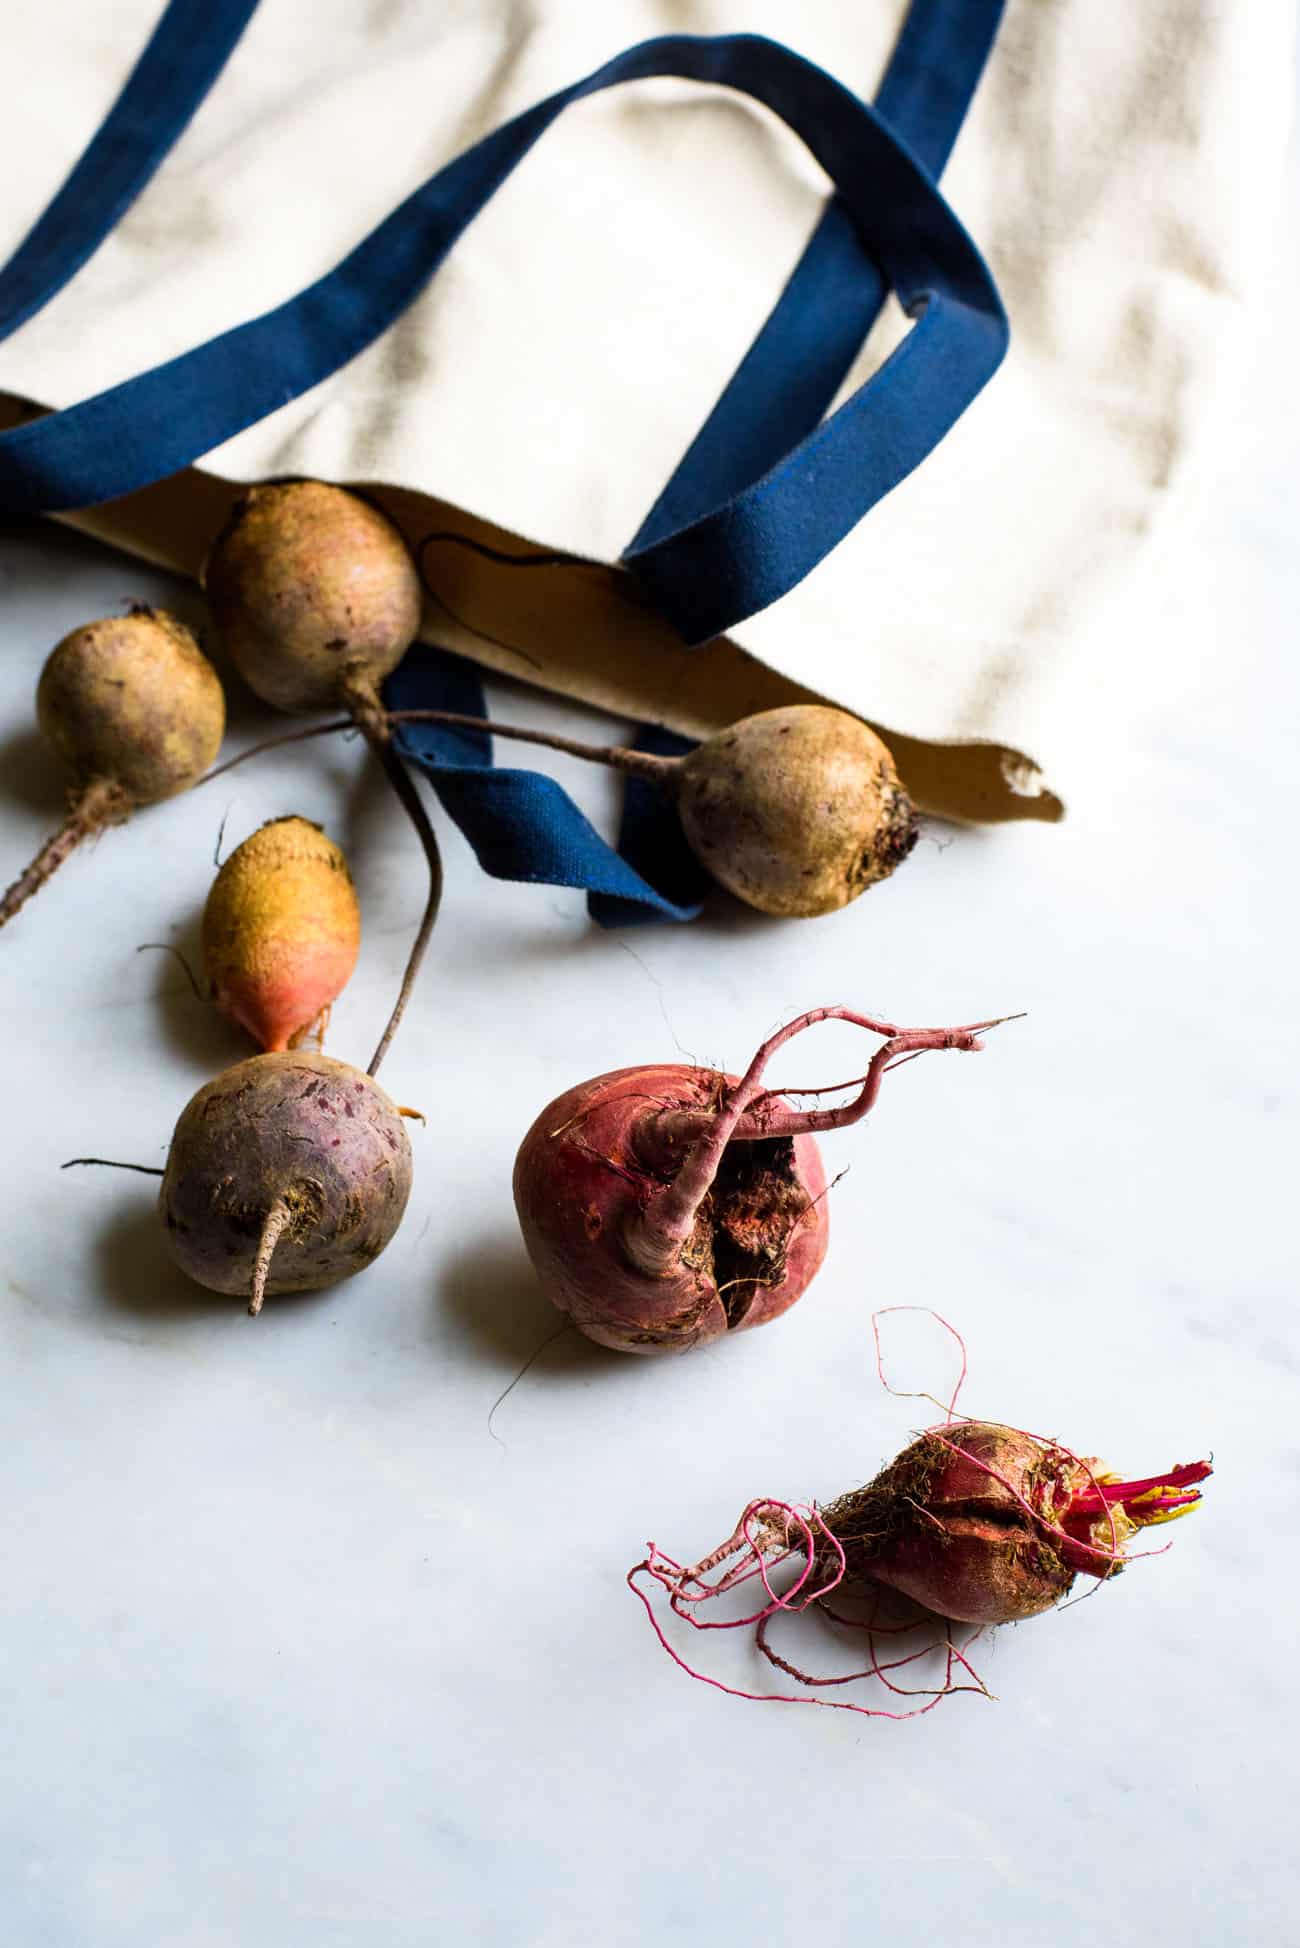 Baby rainbow beets spilling out of a farmers market bag